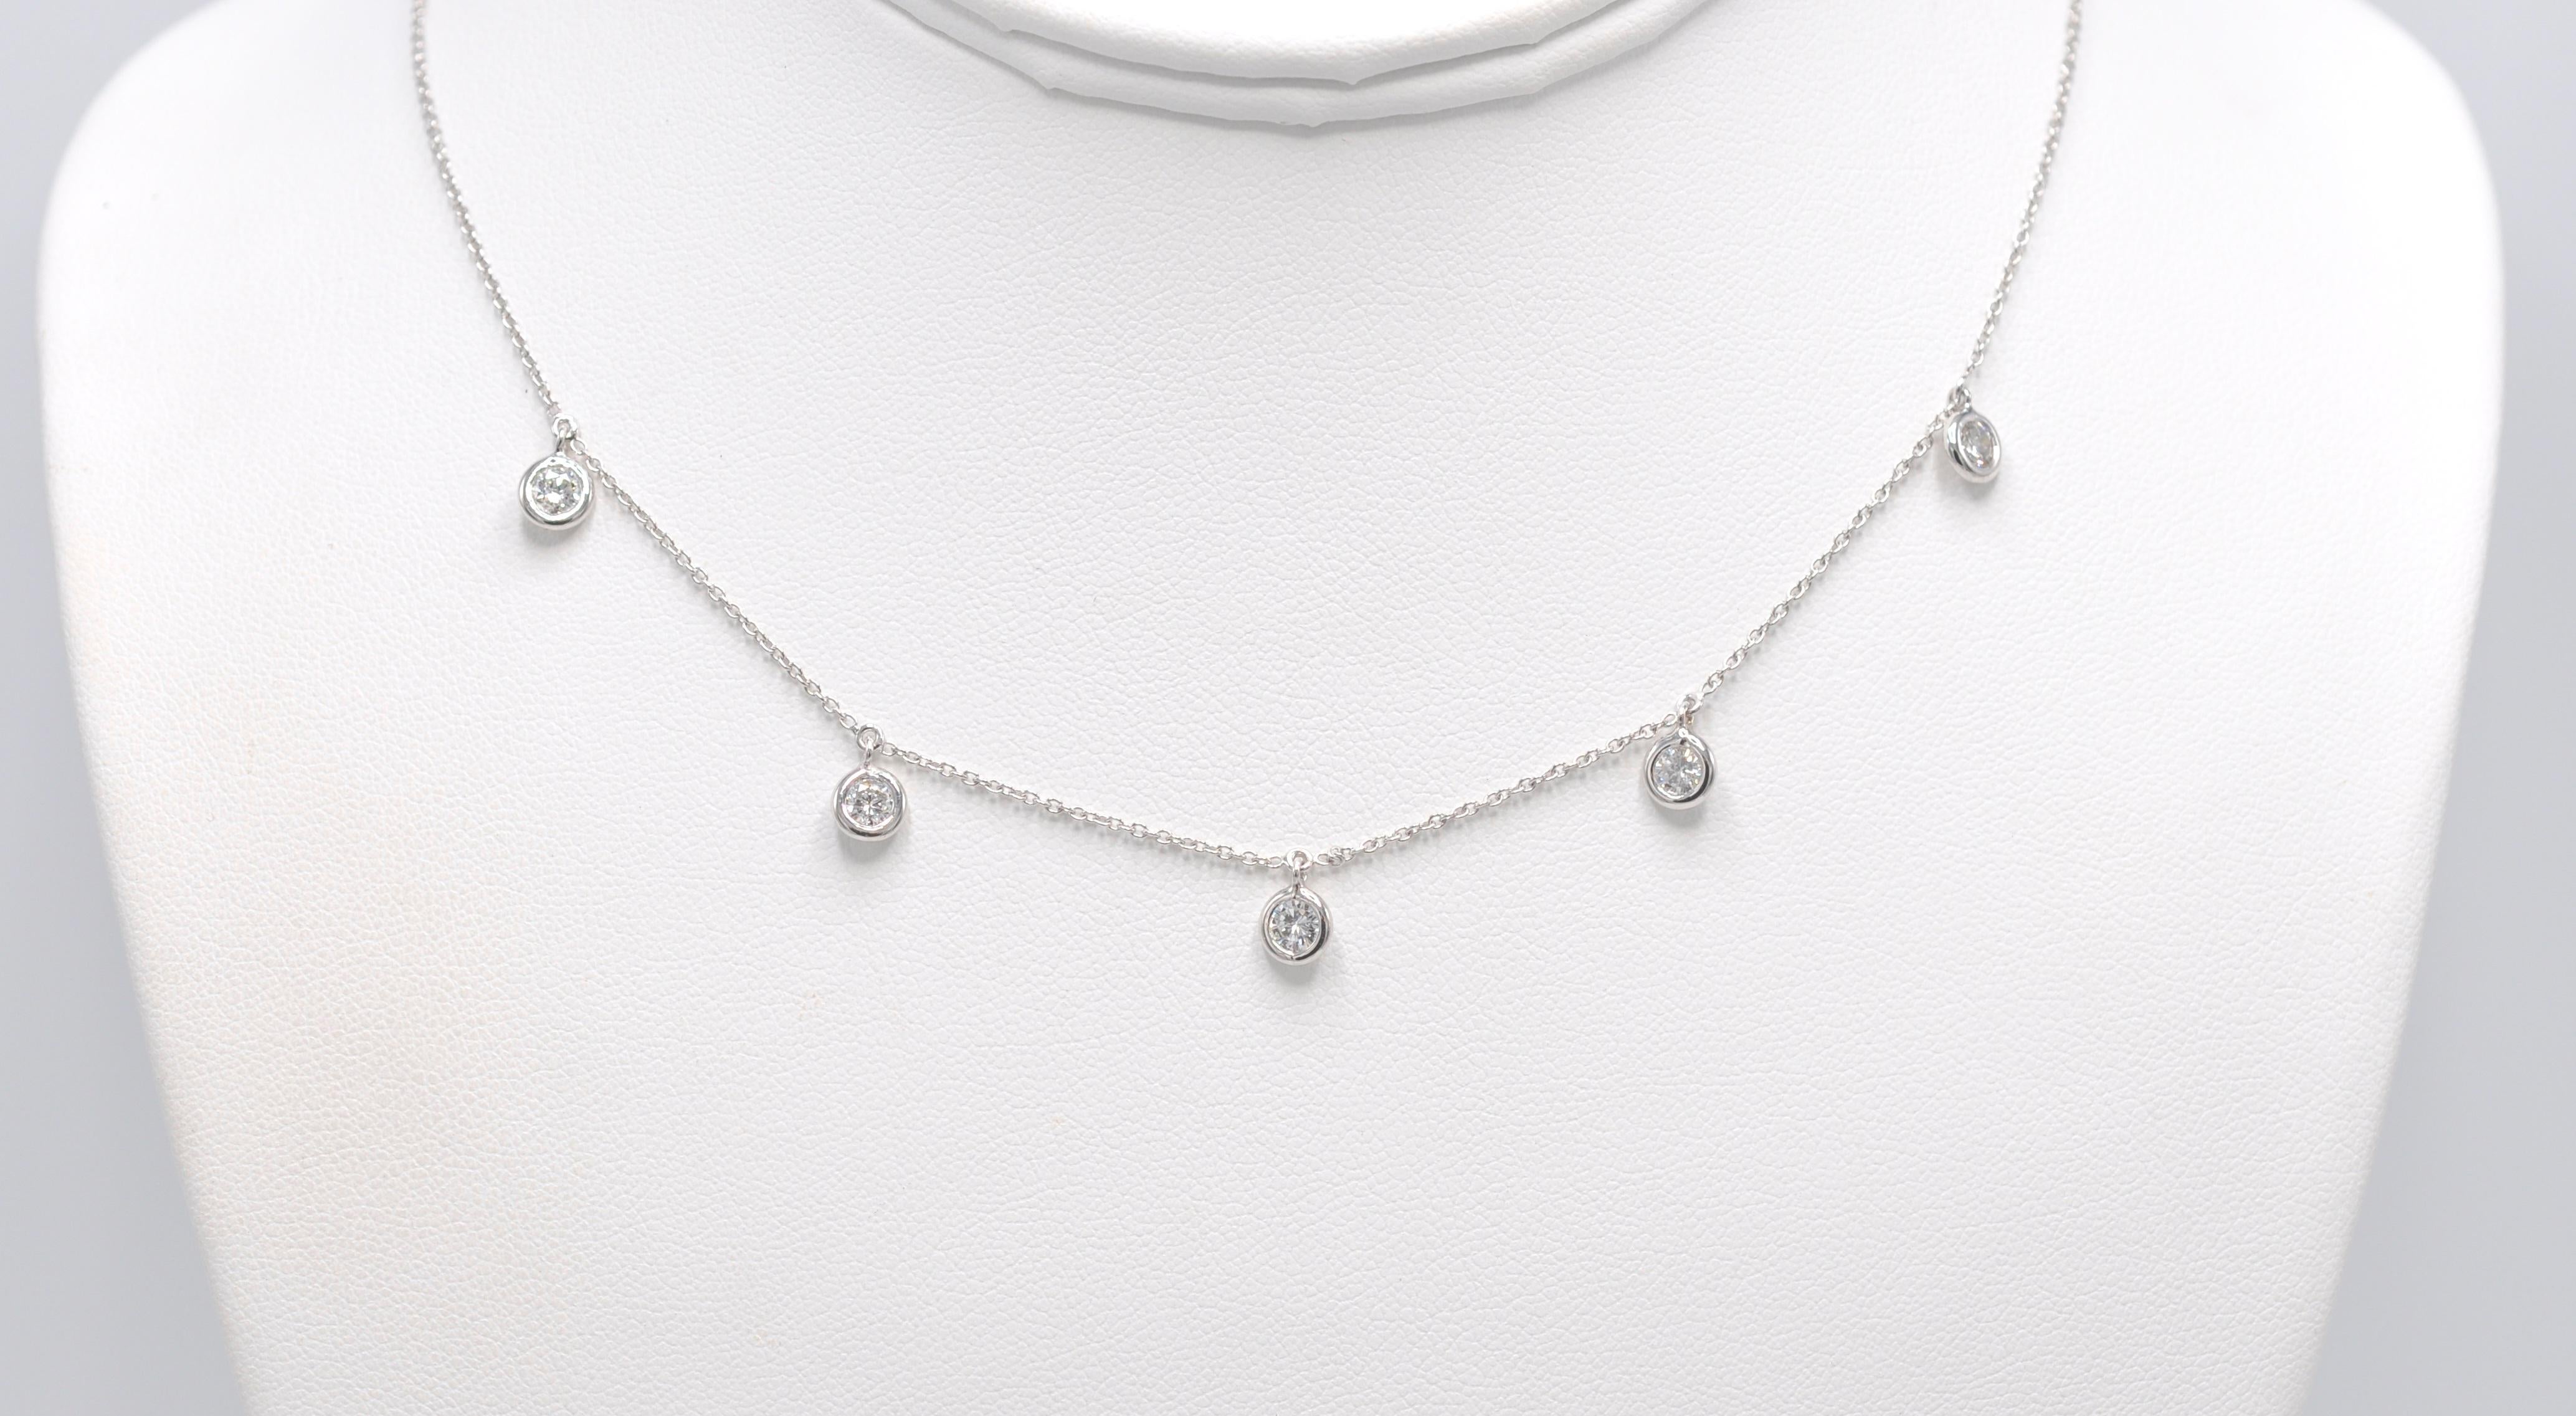 18KW Five Station Bezel Set Diamond Drop Necklace featuring 1.02ctw round diamonds. This is a completely new take on a Diamonds by the Yard- style necklace. This necklace looks wonderful either with a classic white shirt and jeans or a little black